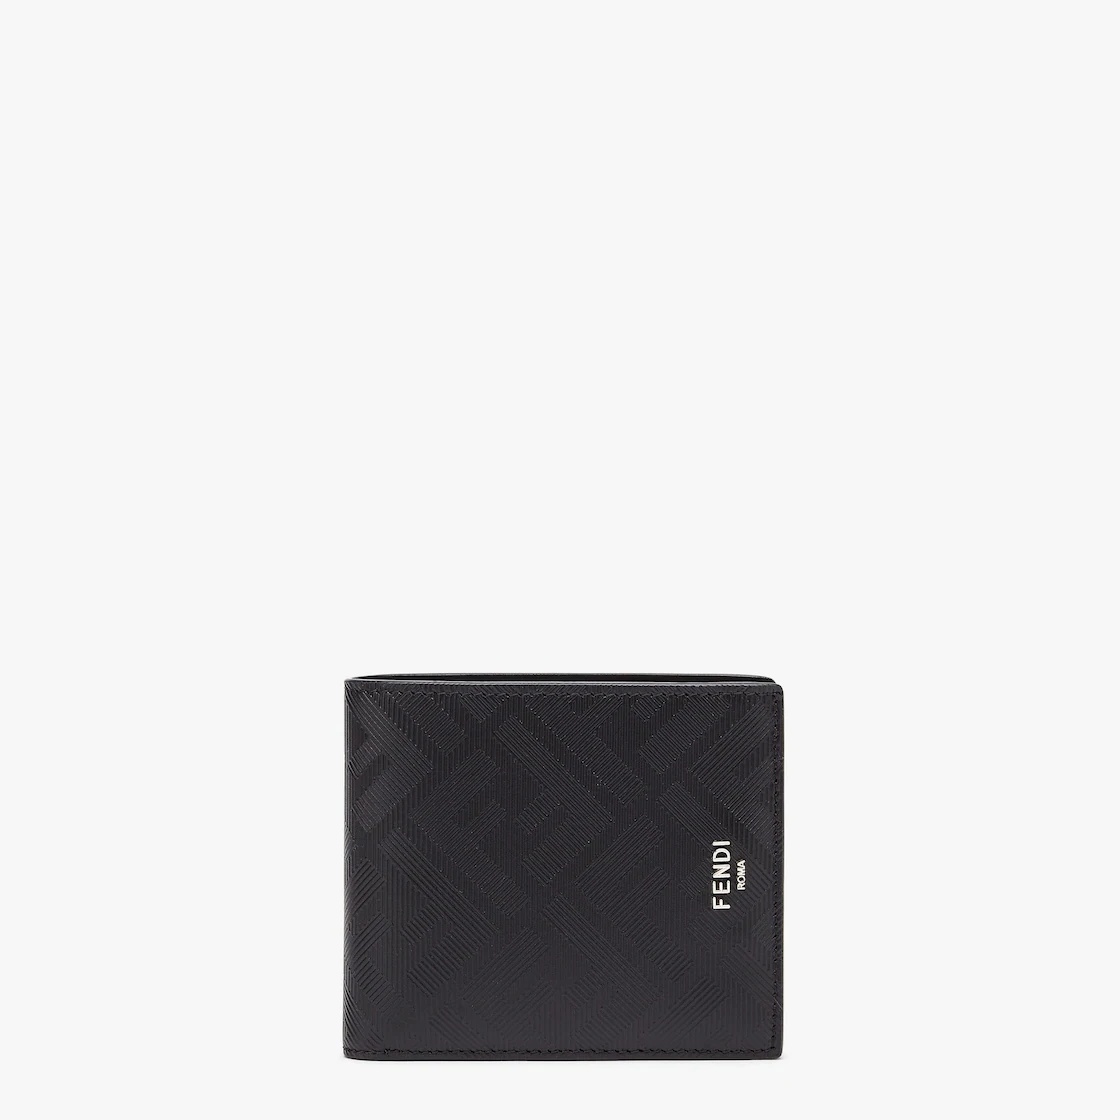 Wallet with eight interior card slots and two compartments for banknotes. Made of black leather with - 1